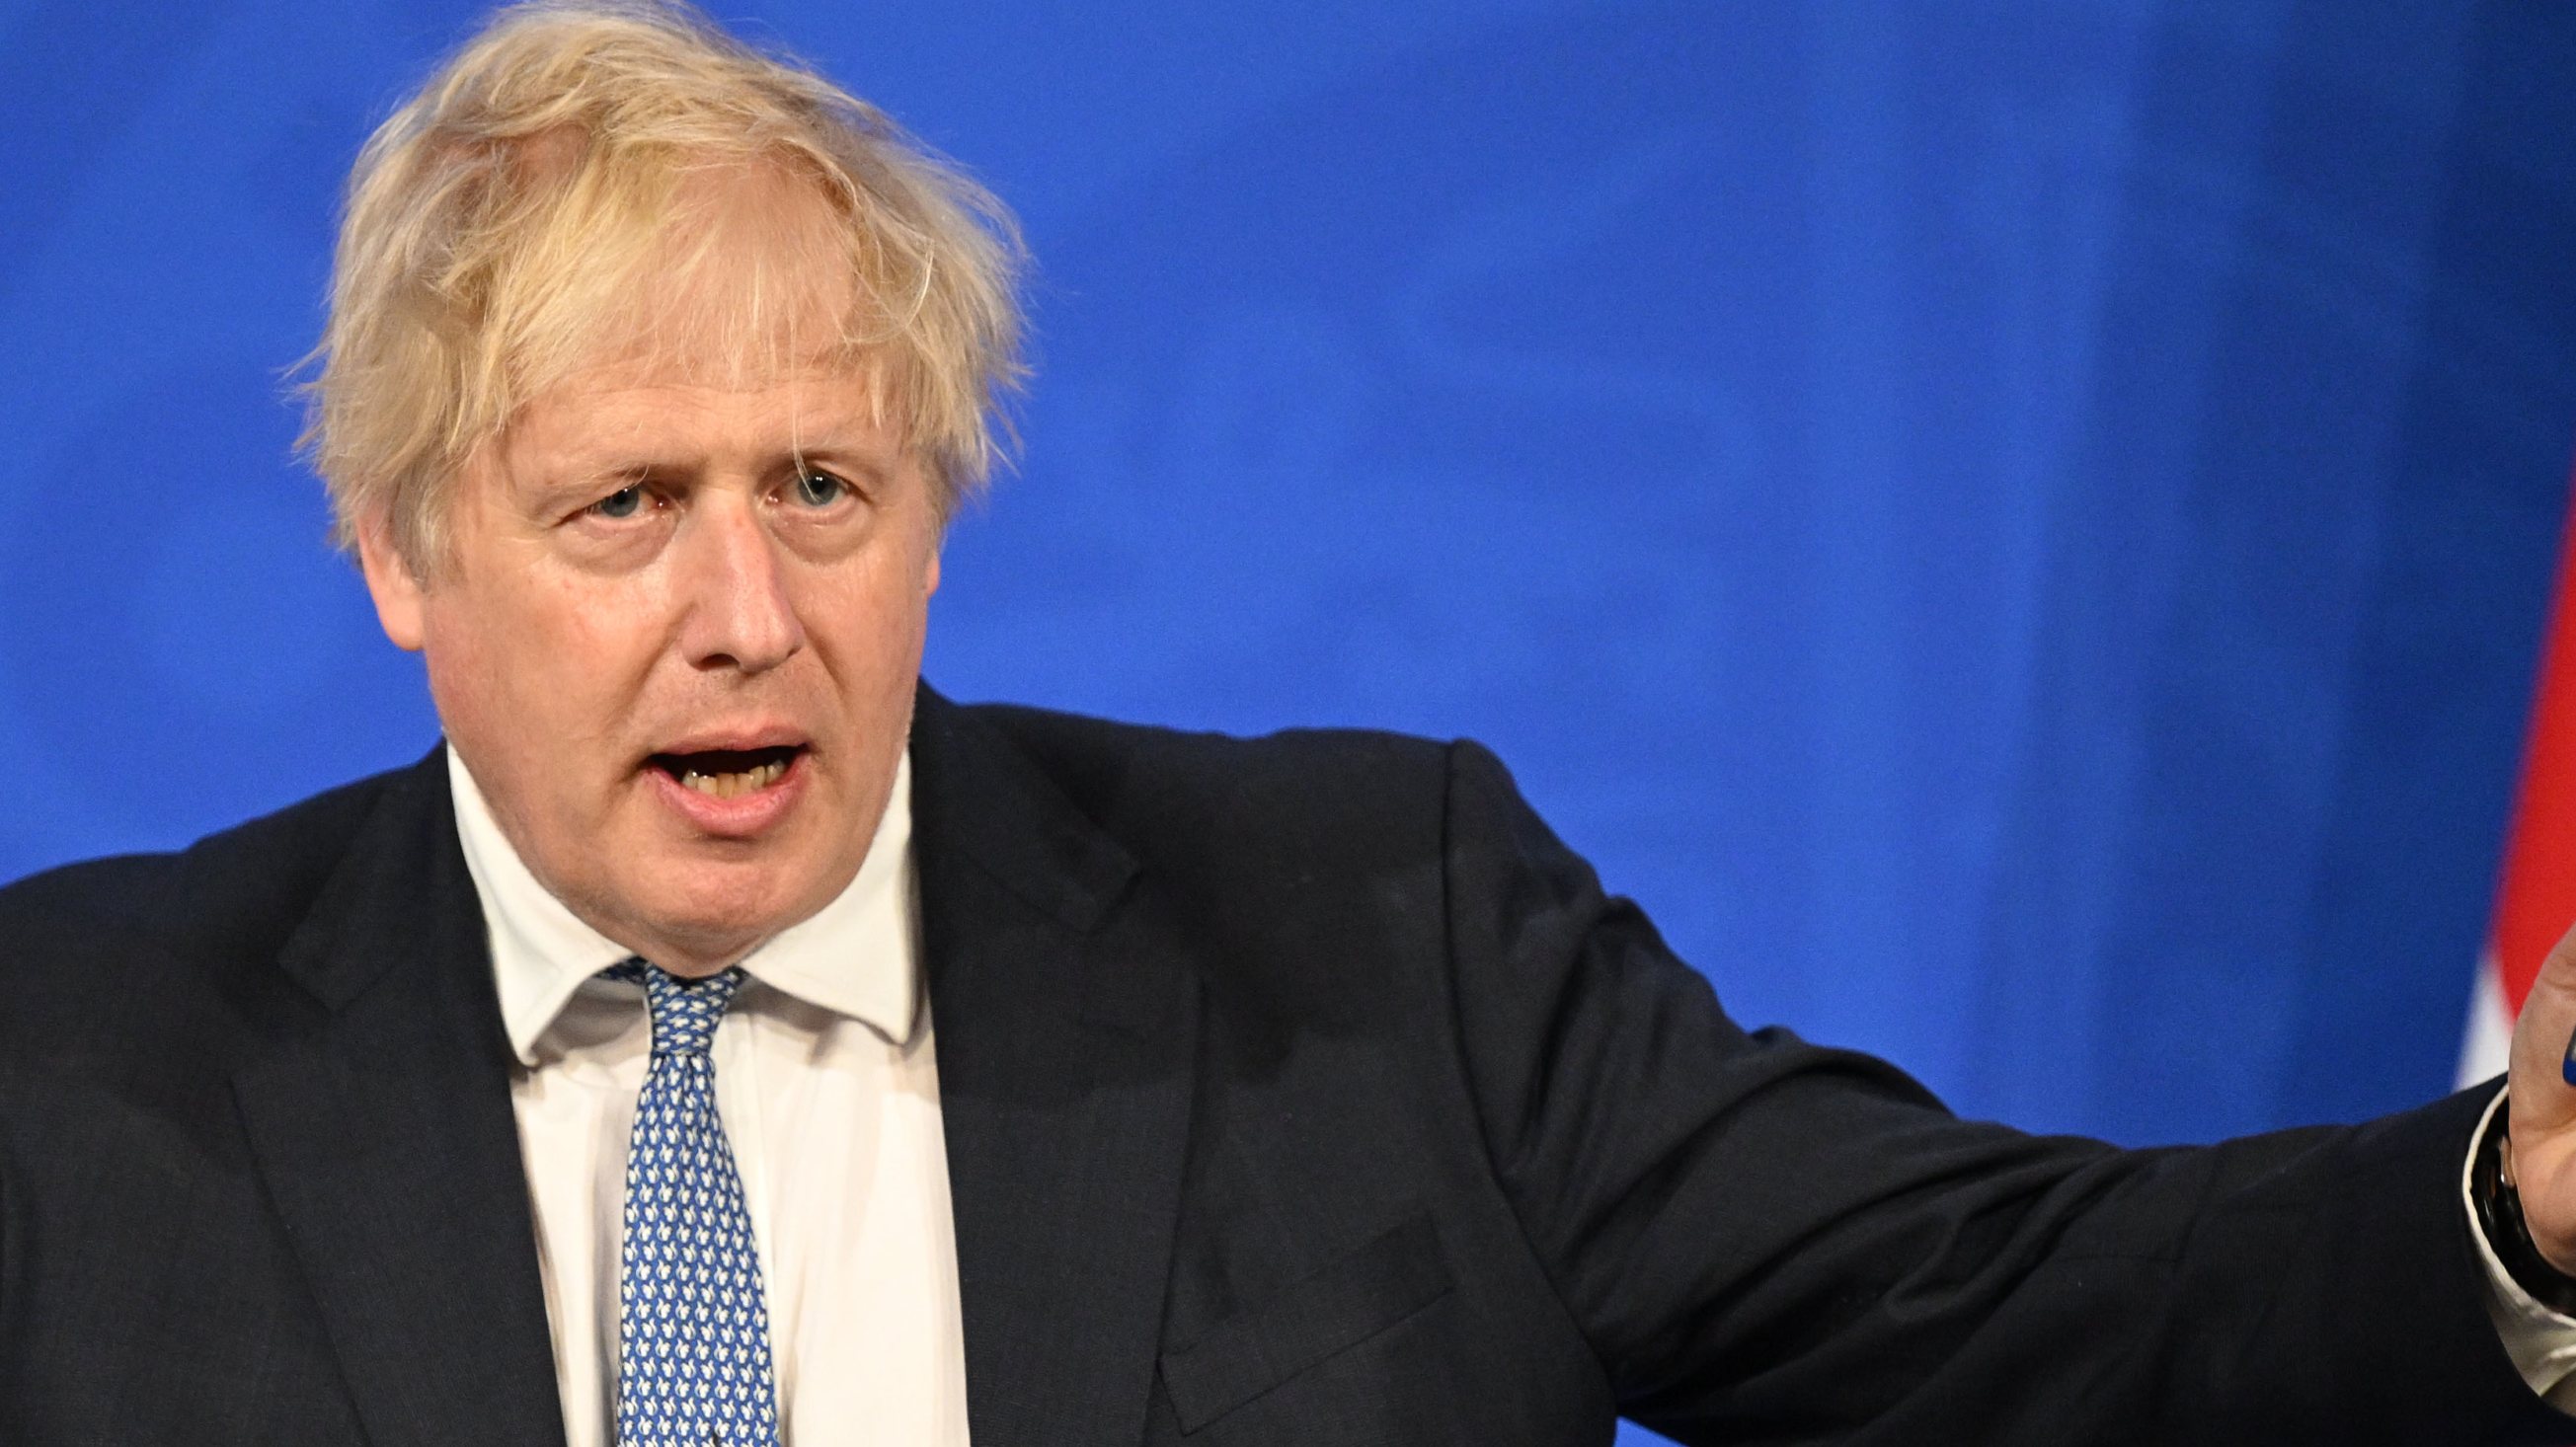 Boris Johnson Holds Press Conference On Publication Of The Sue Gray Report Into &quot;Partygate&quot;